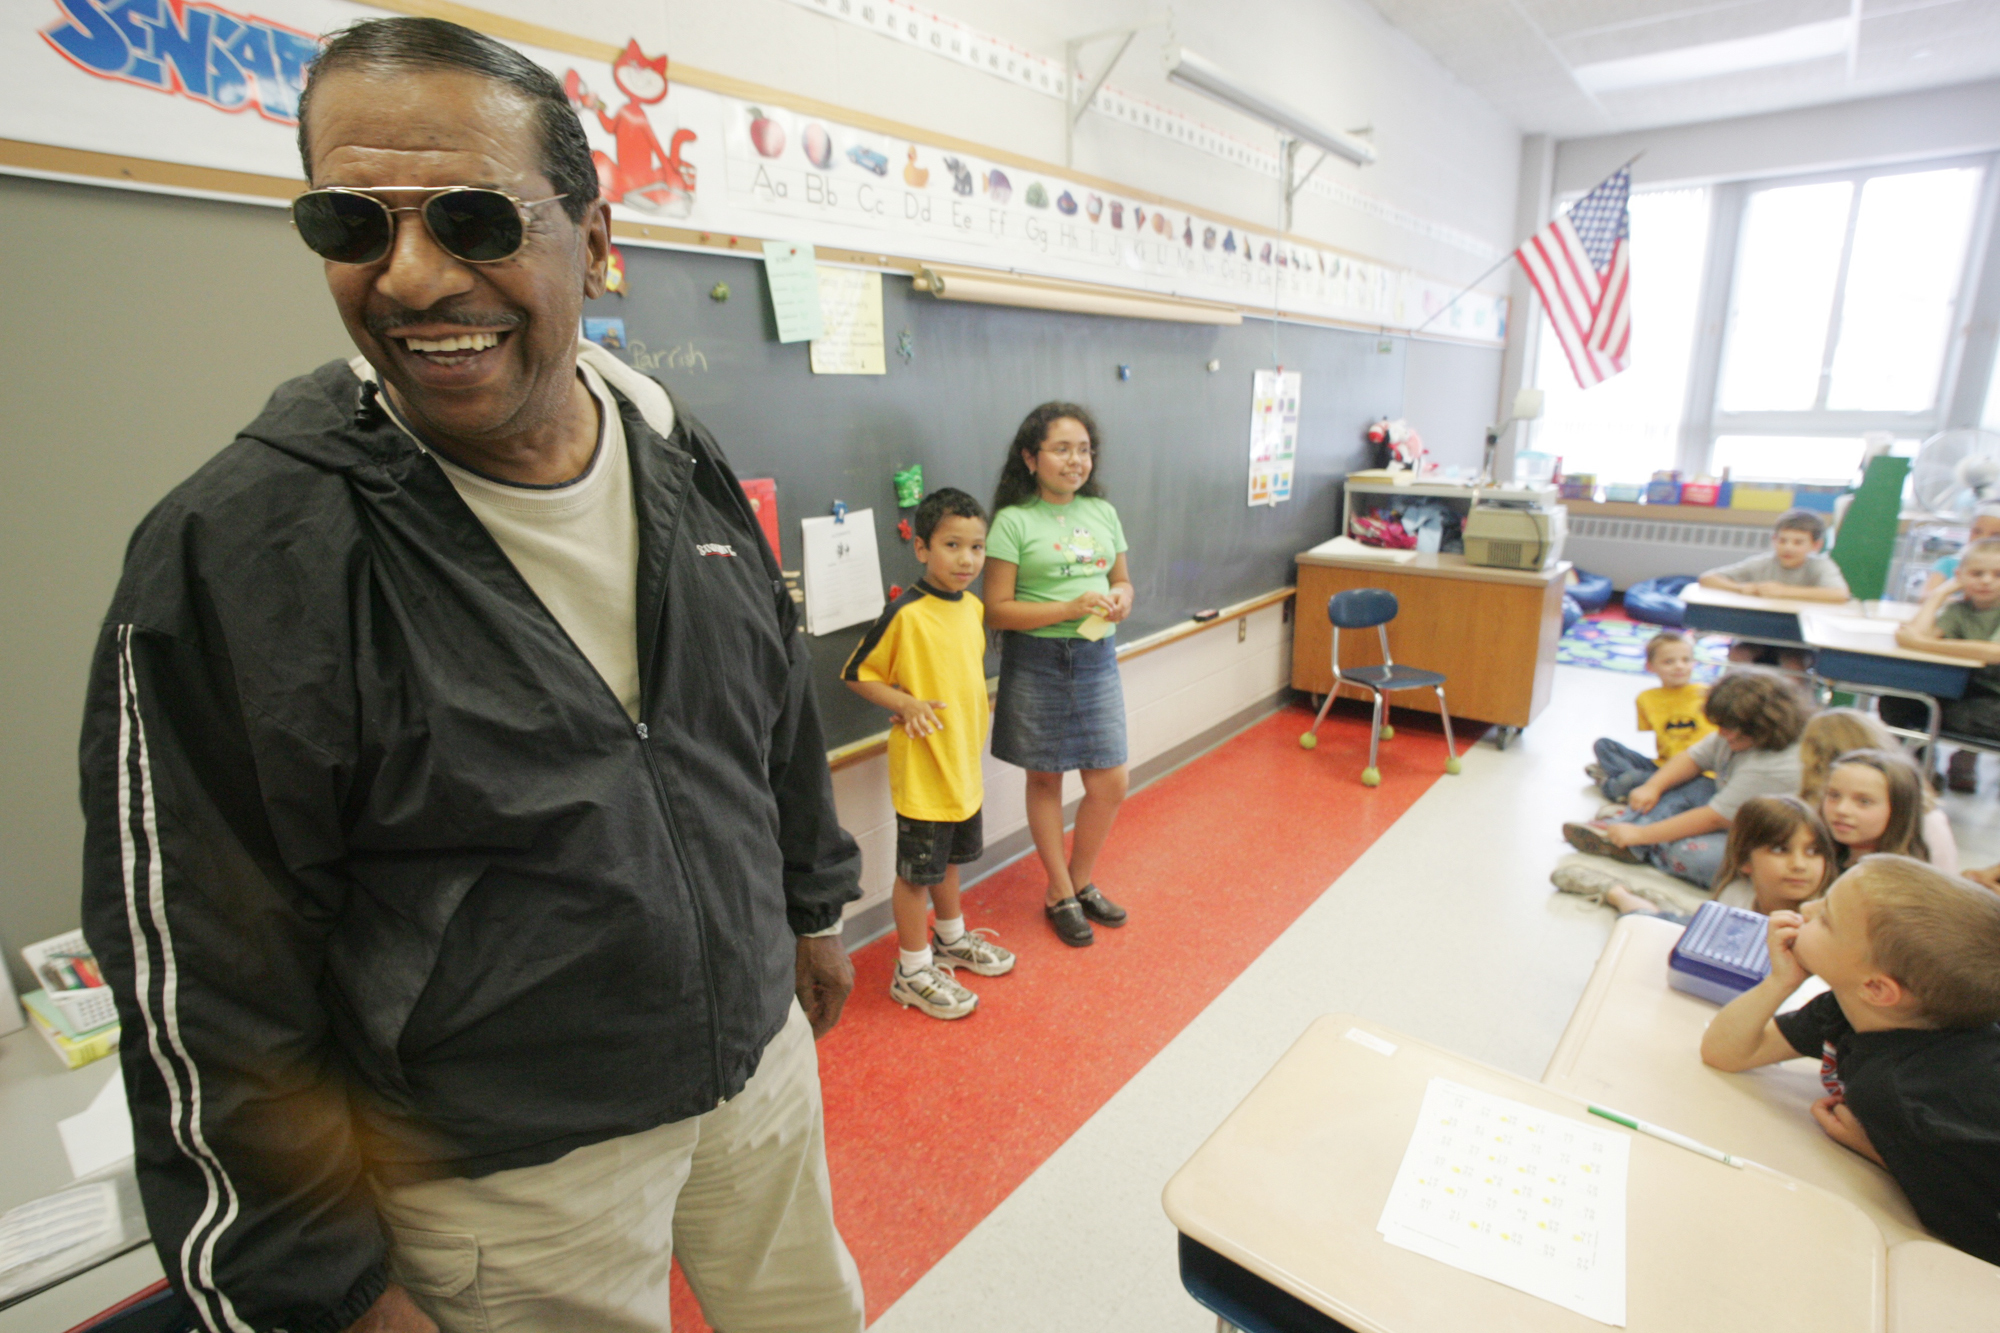 Singer Fred Parris, famous for singing “In the Still of the Night,” with the 1950s harmony group The Five Satins, visits Hanover Elementary School in Meriden, Connecticut, on June 16, 2005. Parris died Jan. 13 after a brief illness. He was 85.